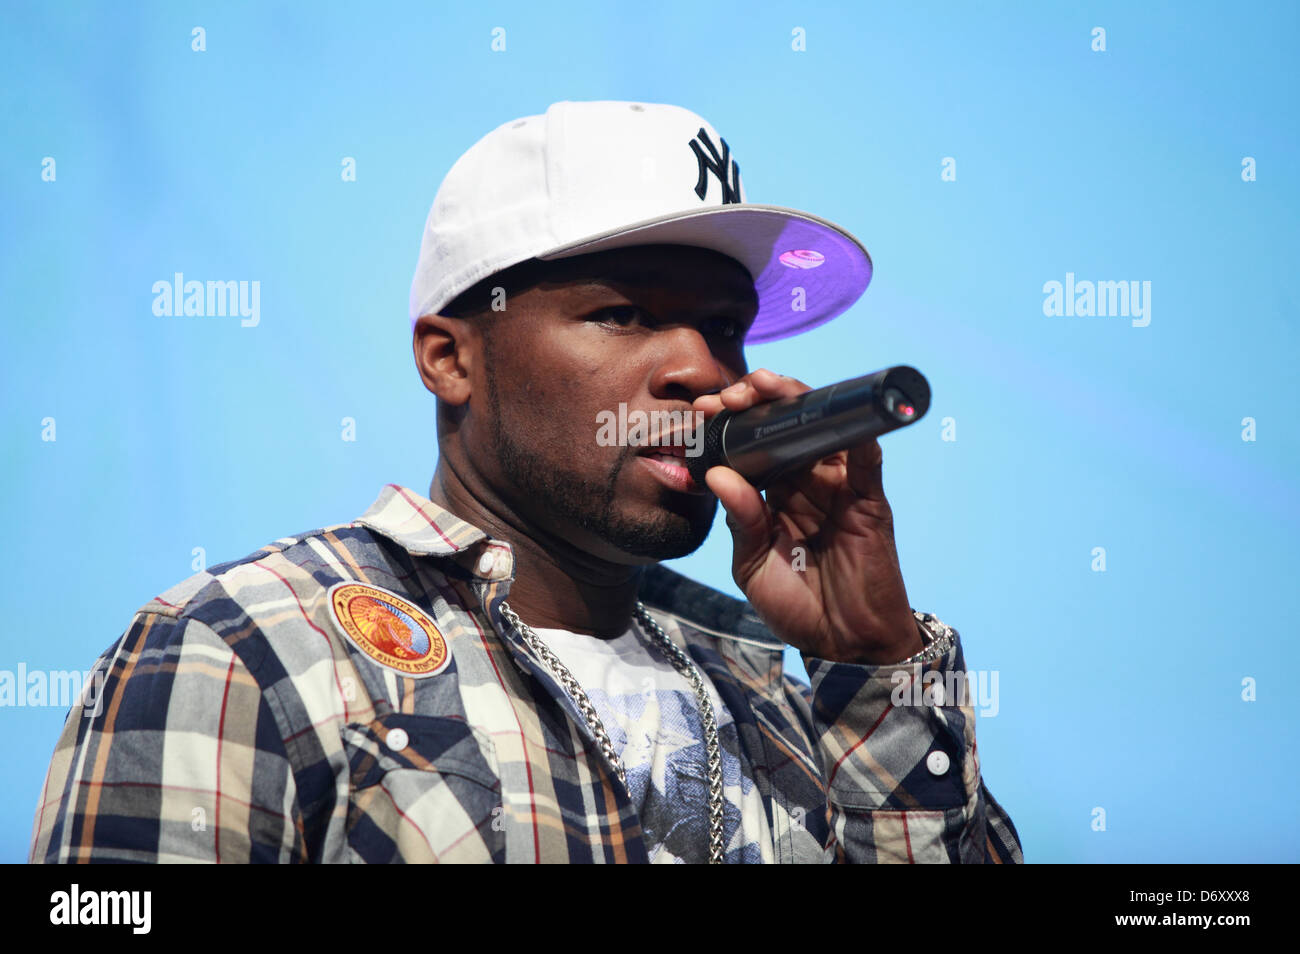 Berlin, Germany, 50 Cent, American rapper, at IFA 2012 Stock Photo